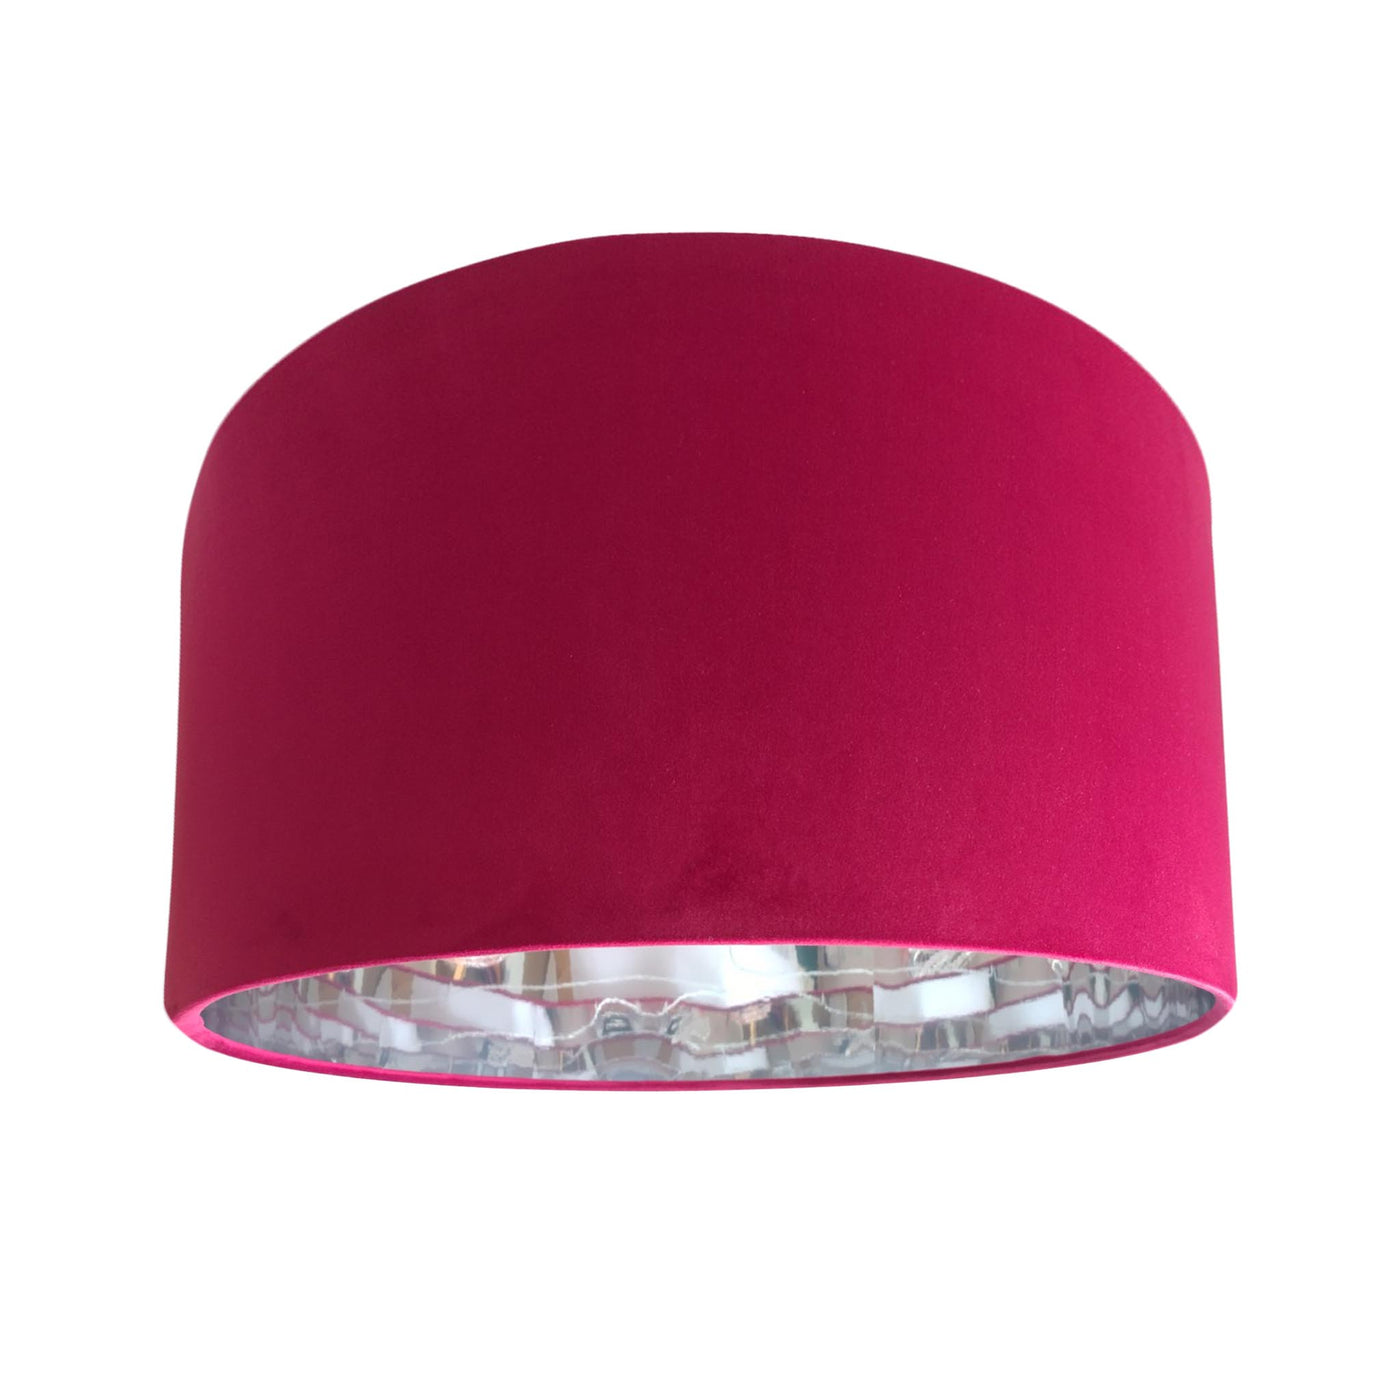 Red Claret Velvet Lampshade with Silver Mirror Lining